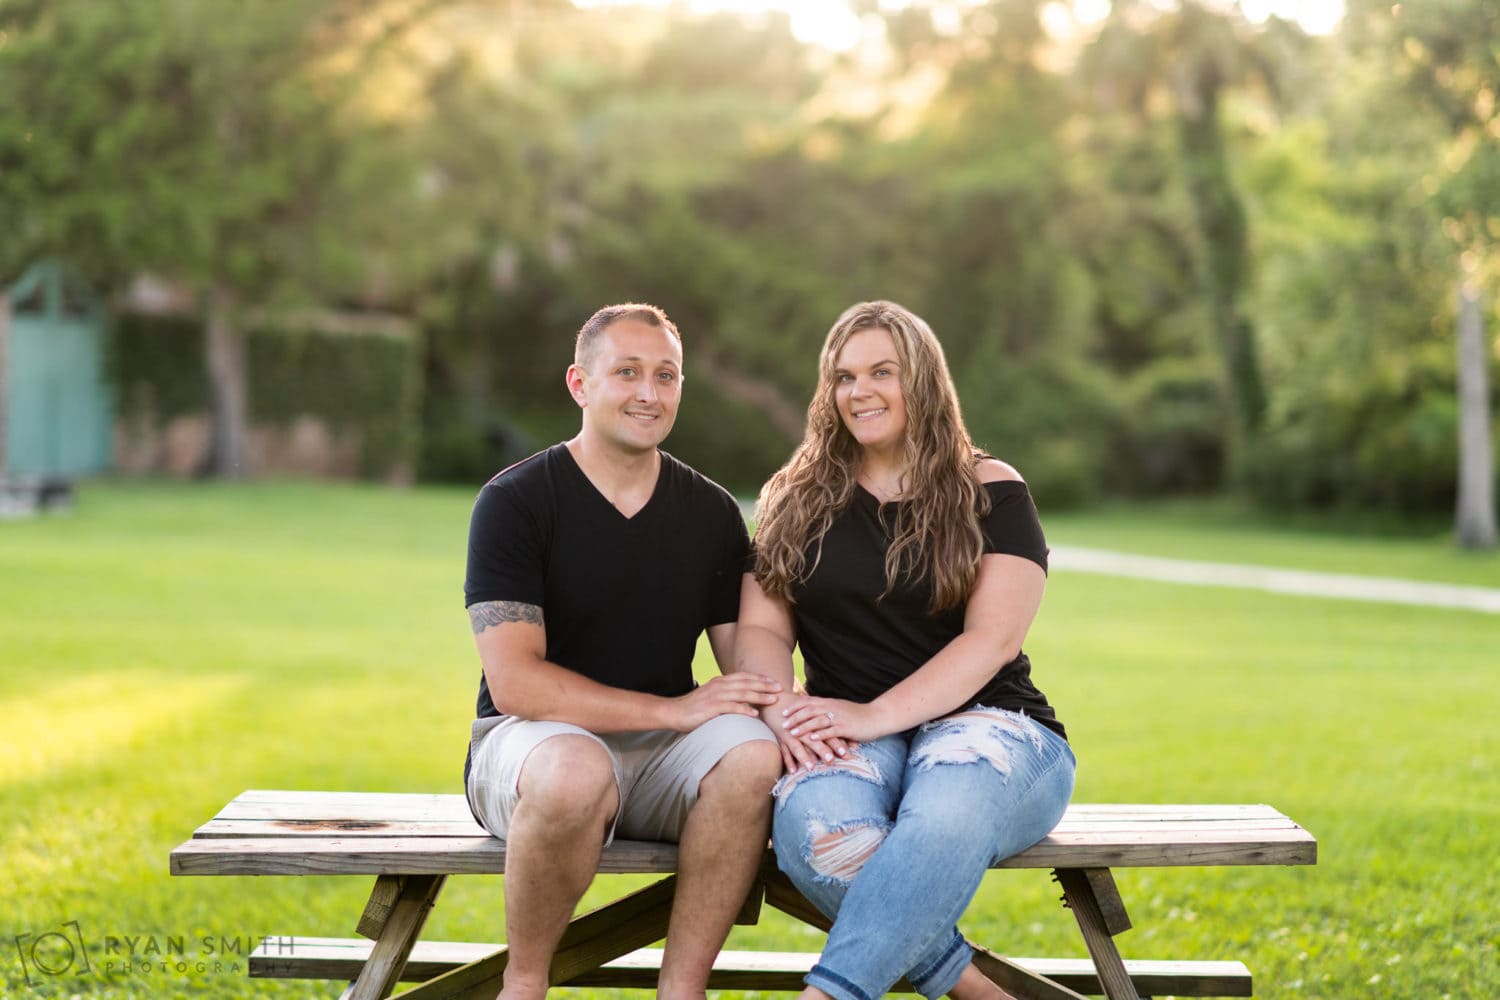 Engagement pictures near the Atalaya Castle - Huntington Beach State Park